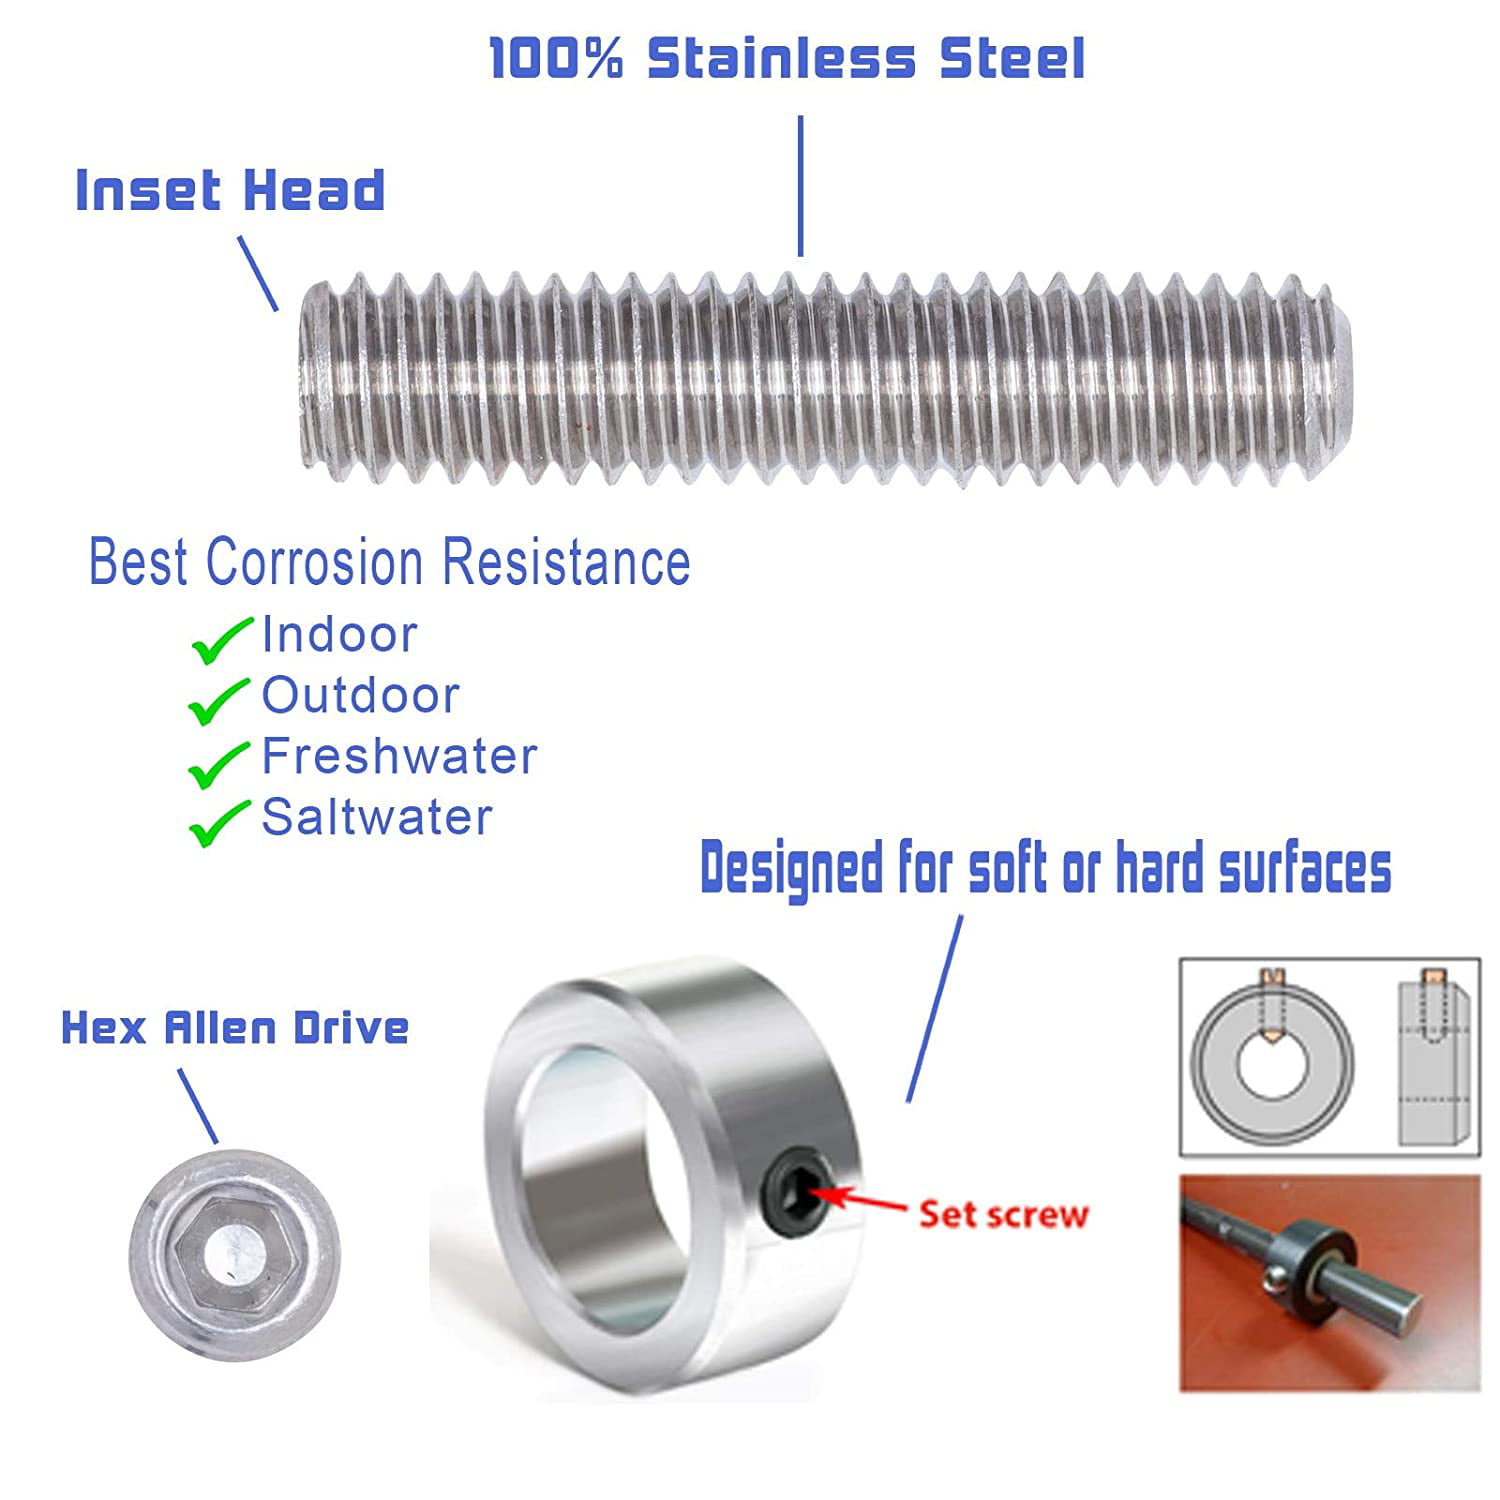 18-8 304 Stainless Steel Screws by Bolt Dropper #4-40 X 1/4 Stainless Set Screw with Hex Allen Head Drive and Oval Point 100 pc 